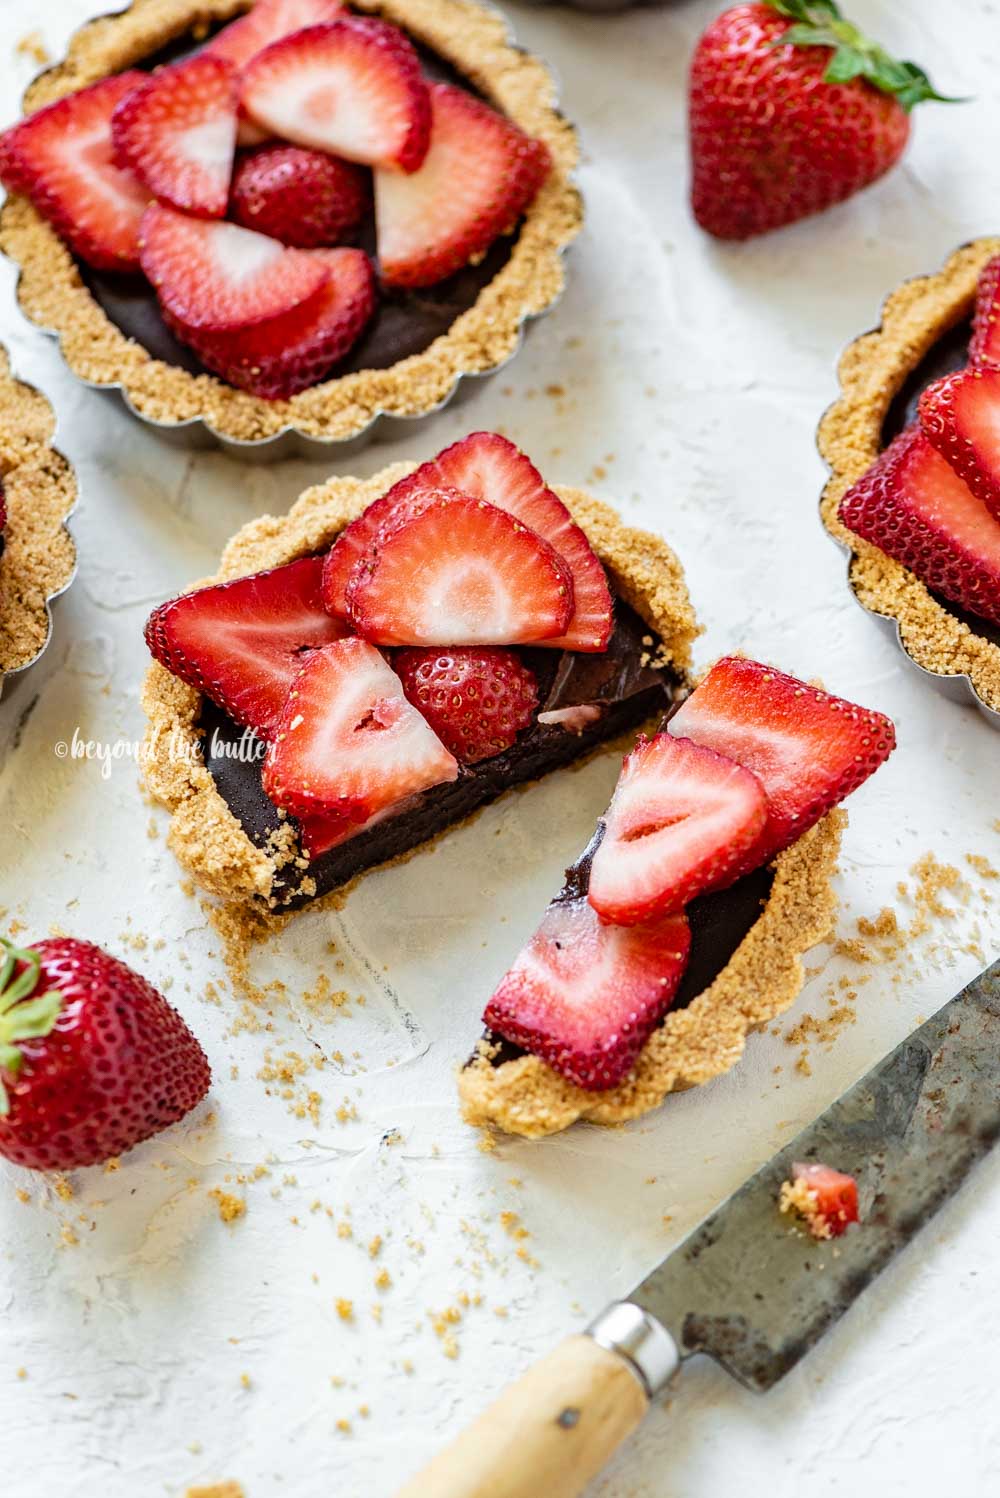 Angled image of mini strawberry nutella tarts on white stucco background with one sliced in half and opened | All Images © Beyond the Butter™